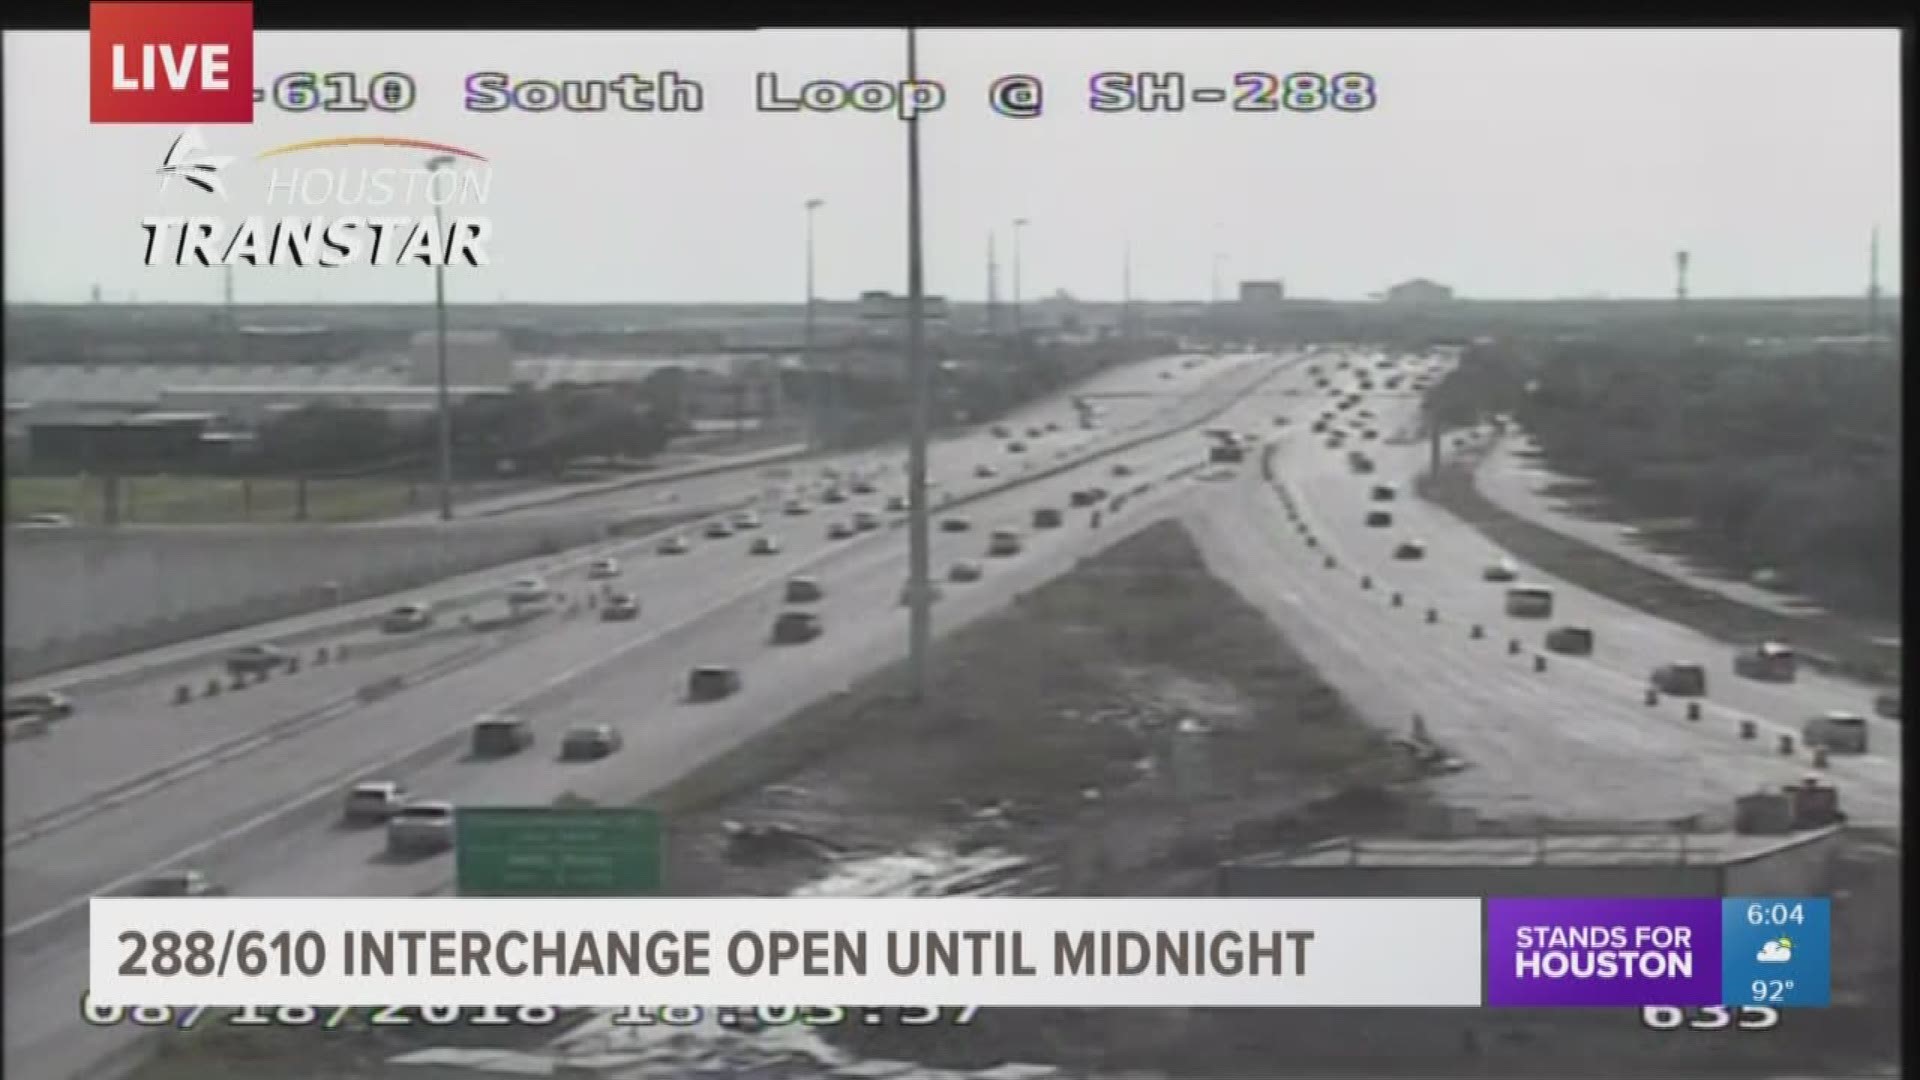 The 288-610 interchange will be open until midnight. But after that, construction crews will close the interchange - all lanes in all directions - for the rest of the weekend.